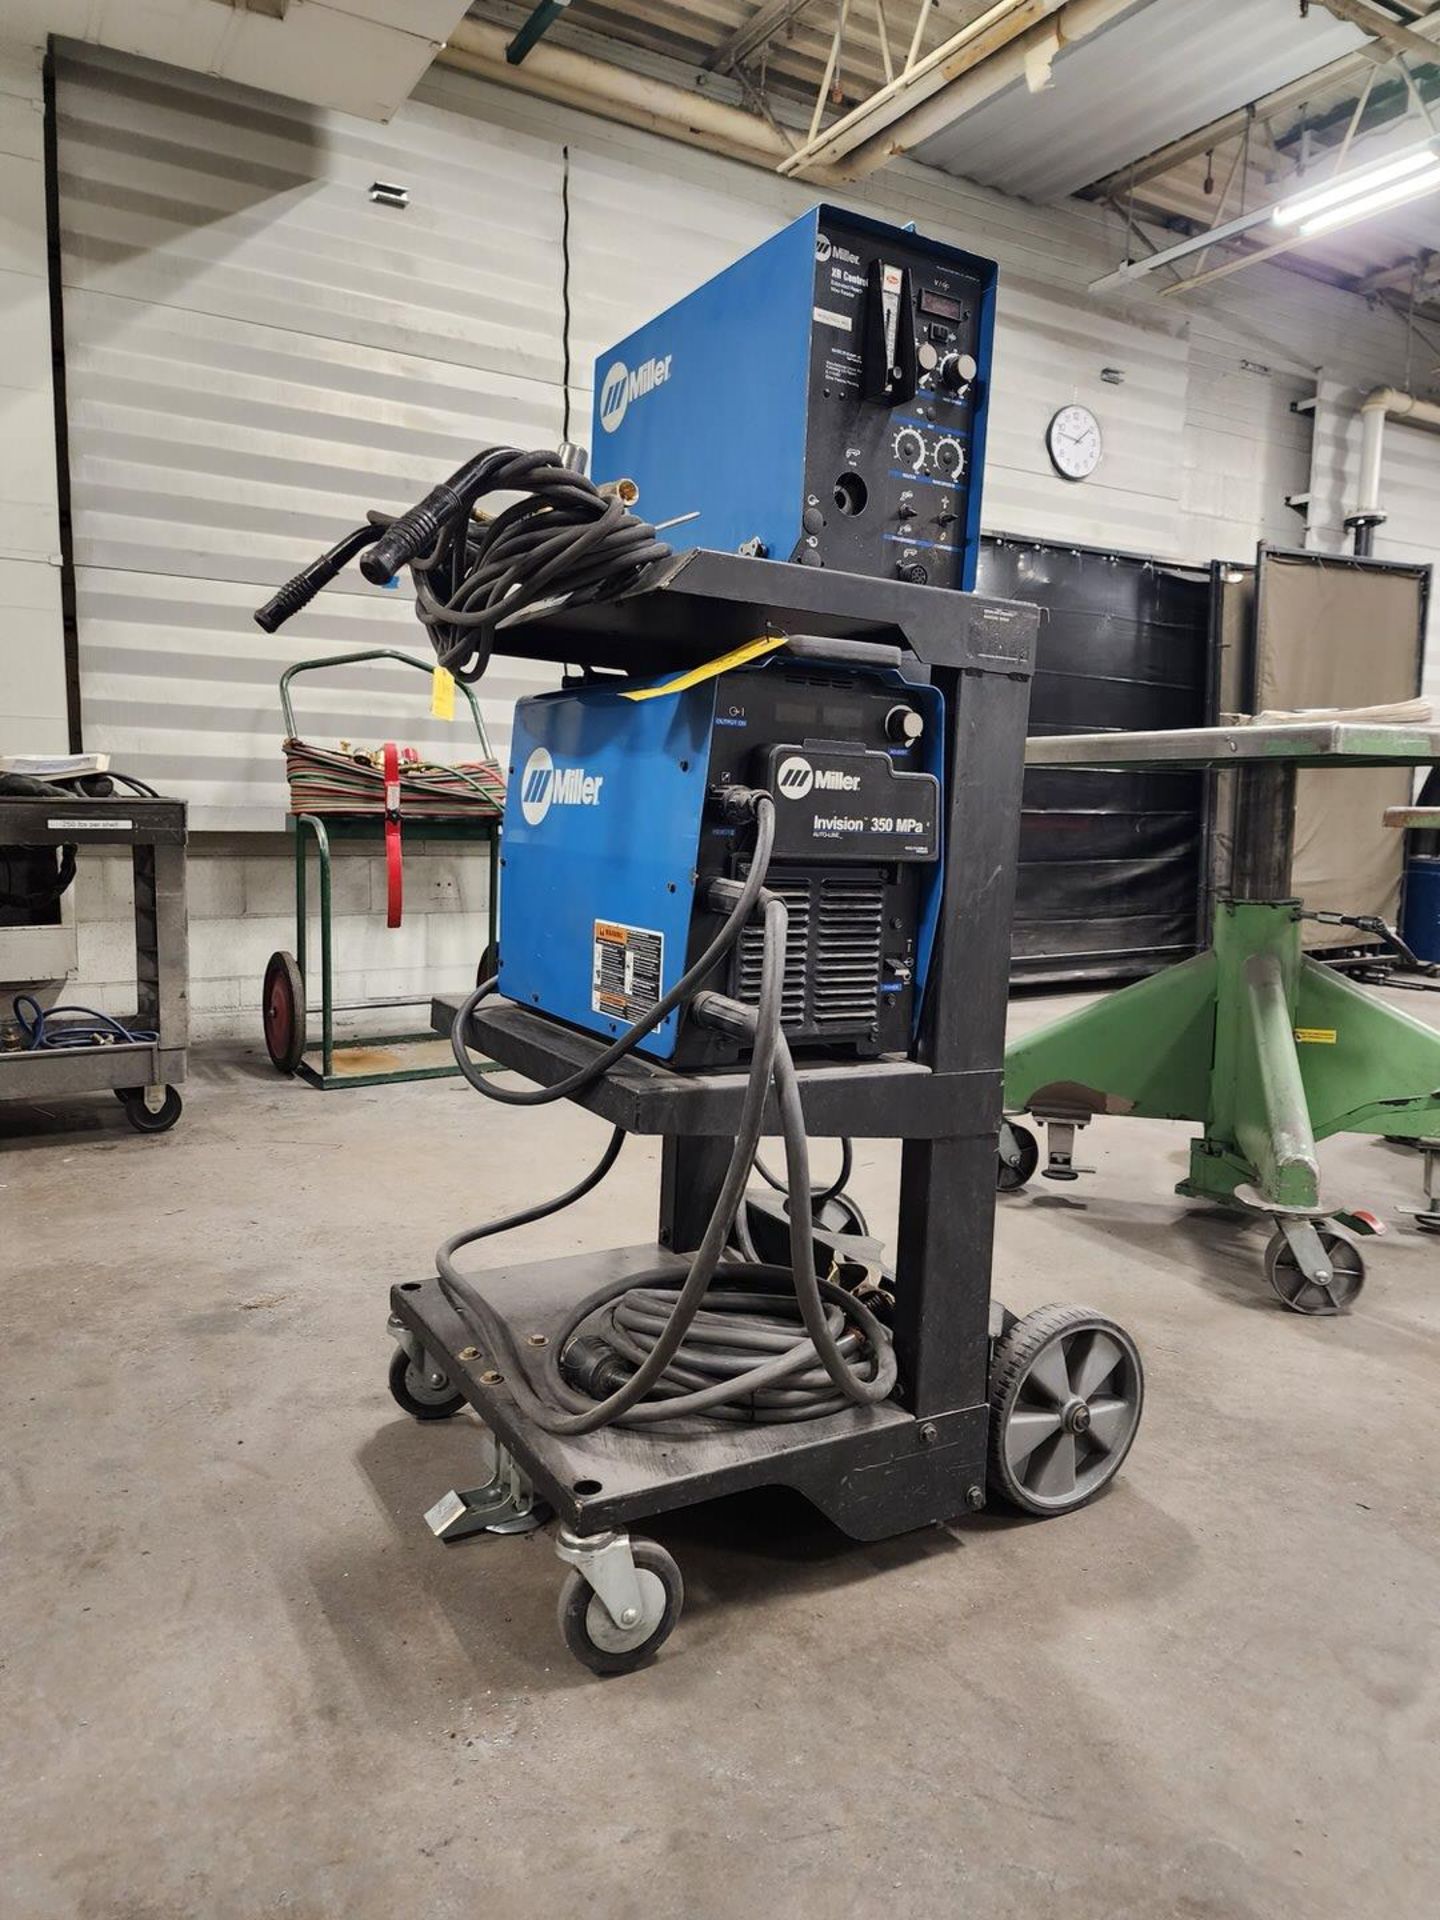 Miller Invision 350 MPA Multiprocess Welder DC Amps: 300/350; 208-575V; 11.2/13.6kw; 1PH; W/ XR - Image 7 of 15